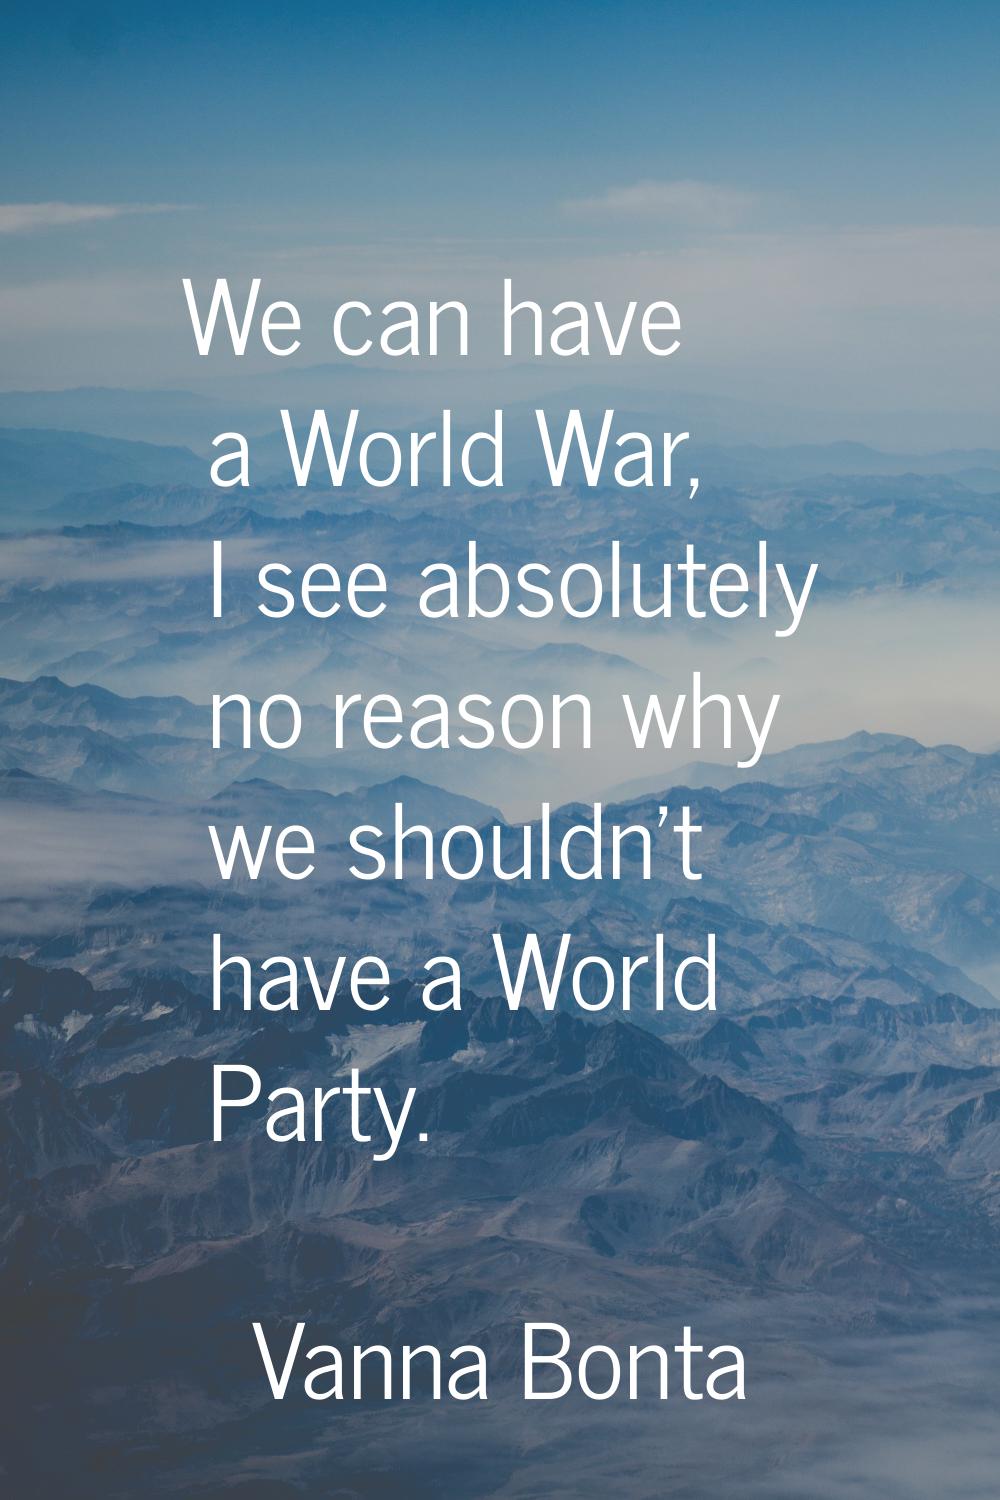 We can have a World War, I see absolutely no reason why we shouldn't have a World Party.